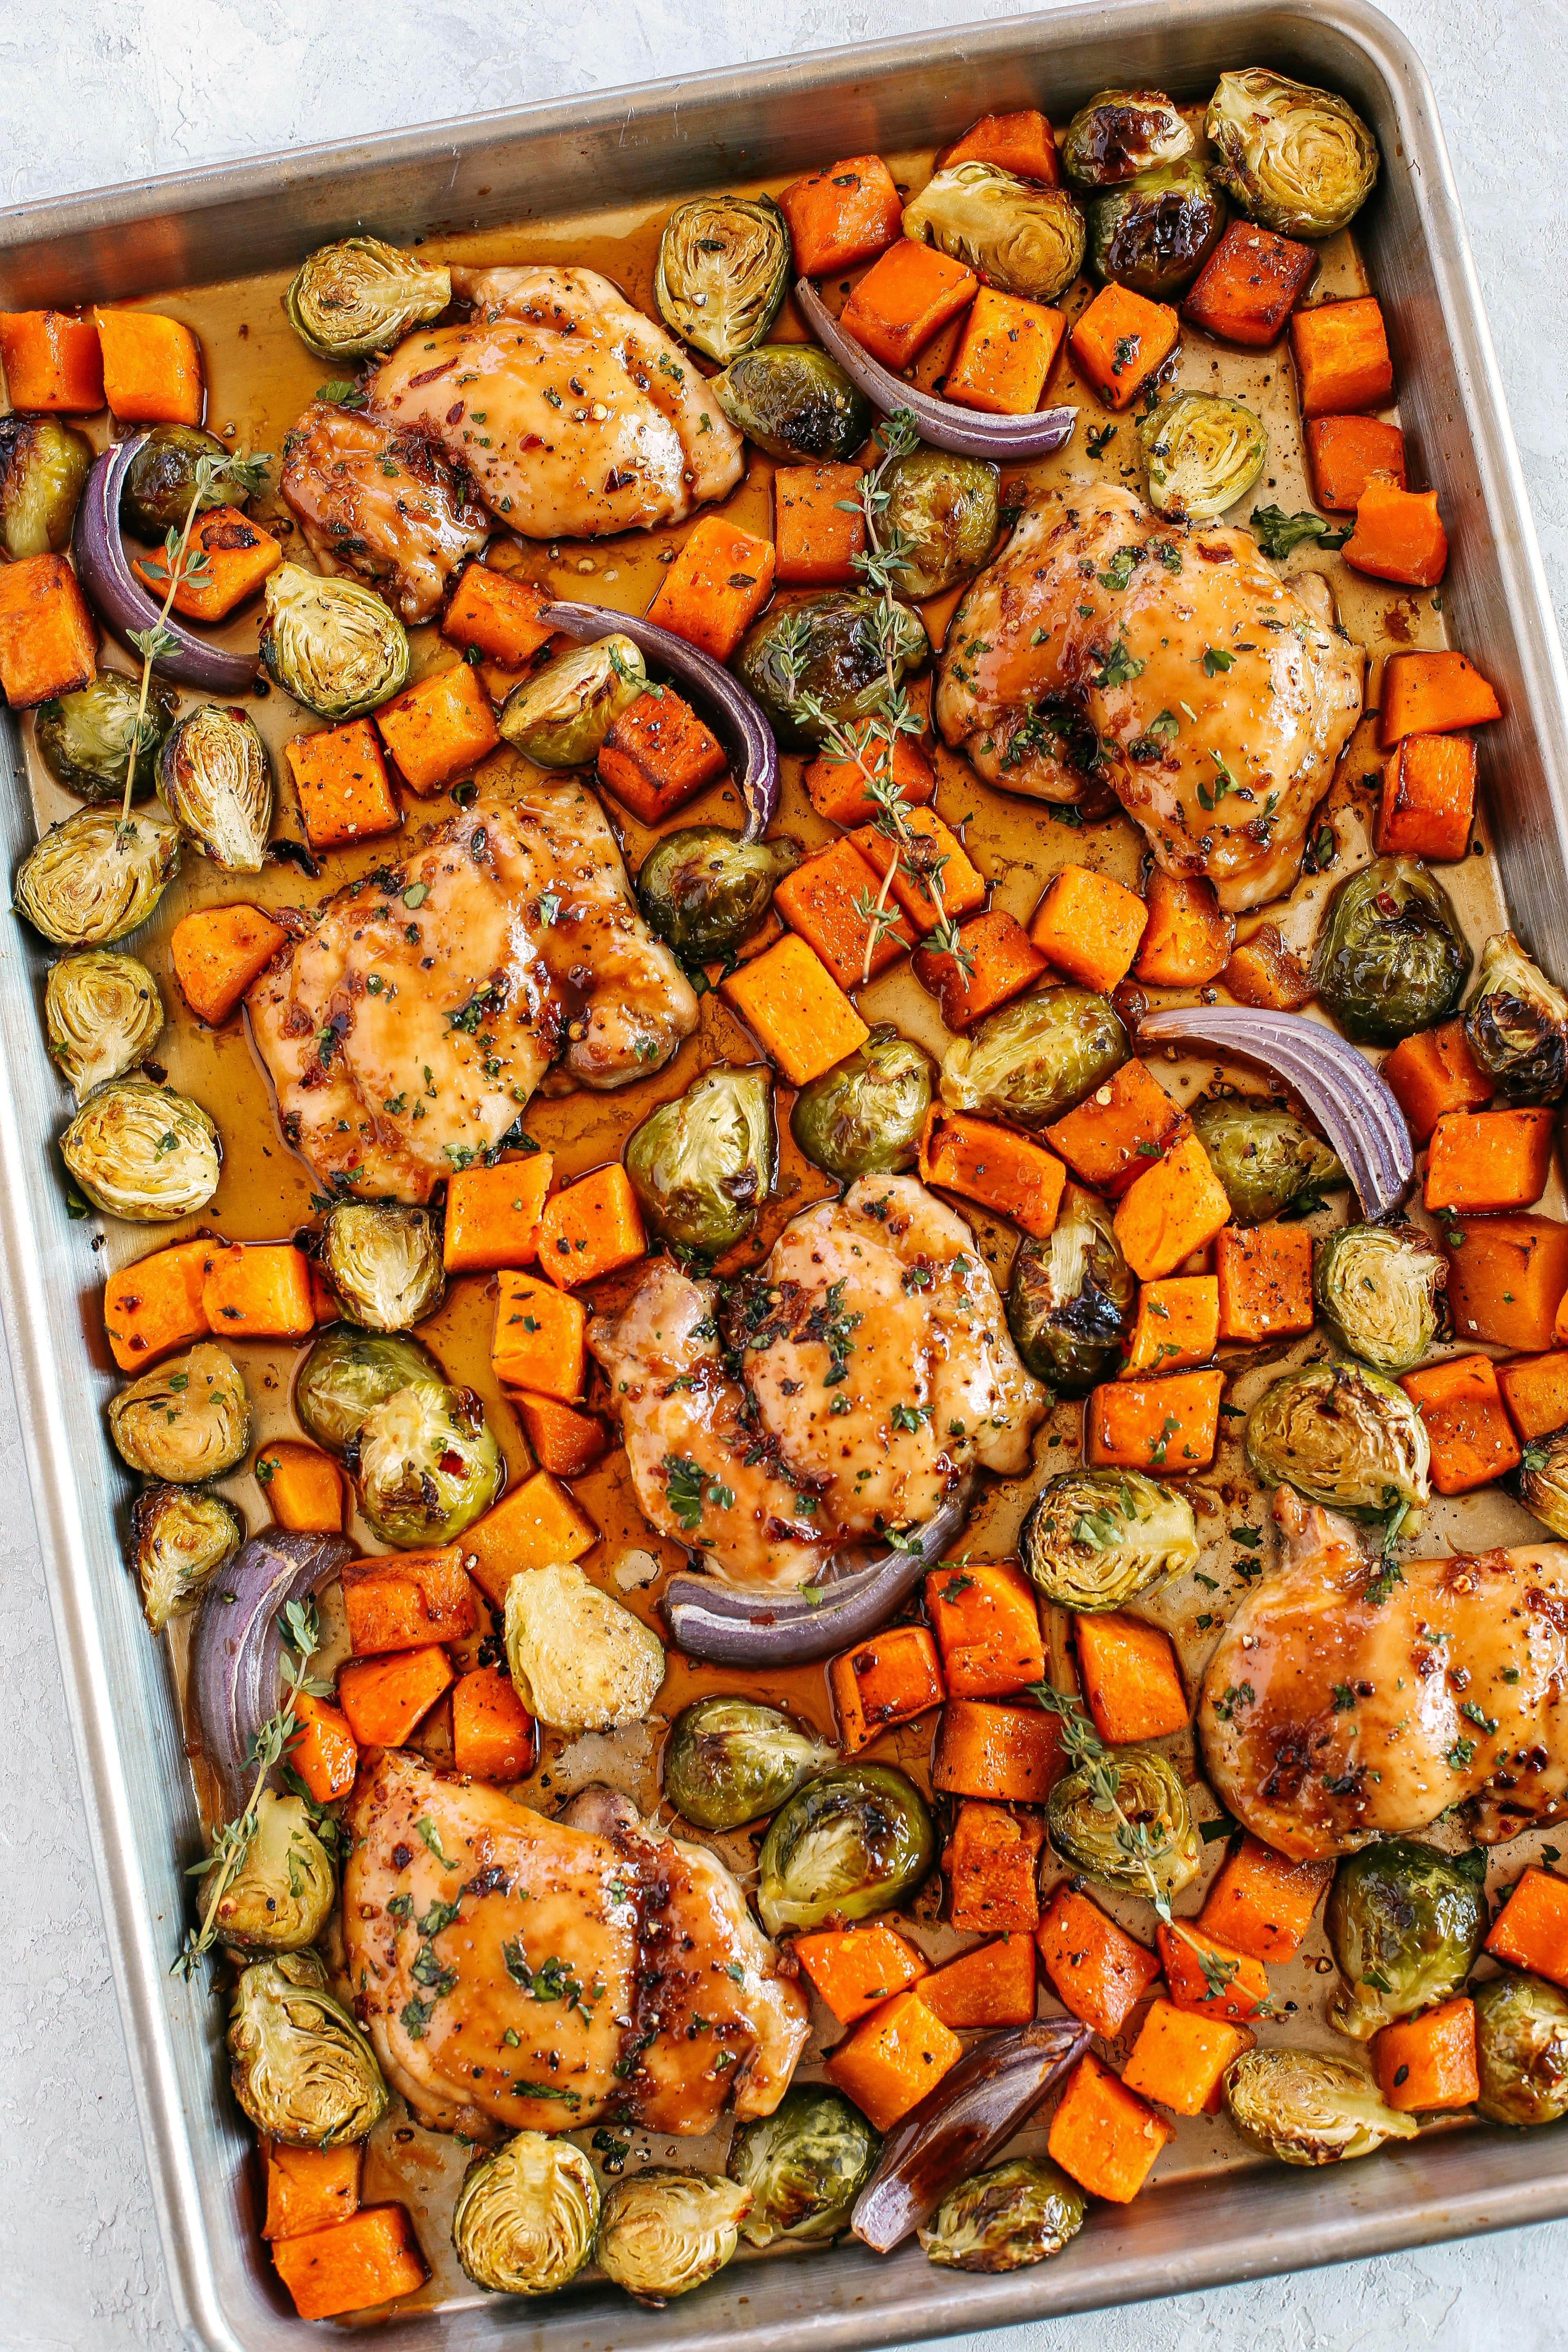 This Sheet Pan Ginger Maple Chicken with Brussels Sprouts and Butternut Squash makes the perfect weeknight dinner that’s healthy, delicious and easily made all on one pan in under 30 minutes!  